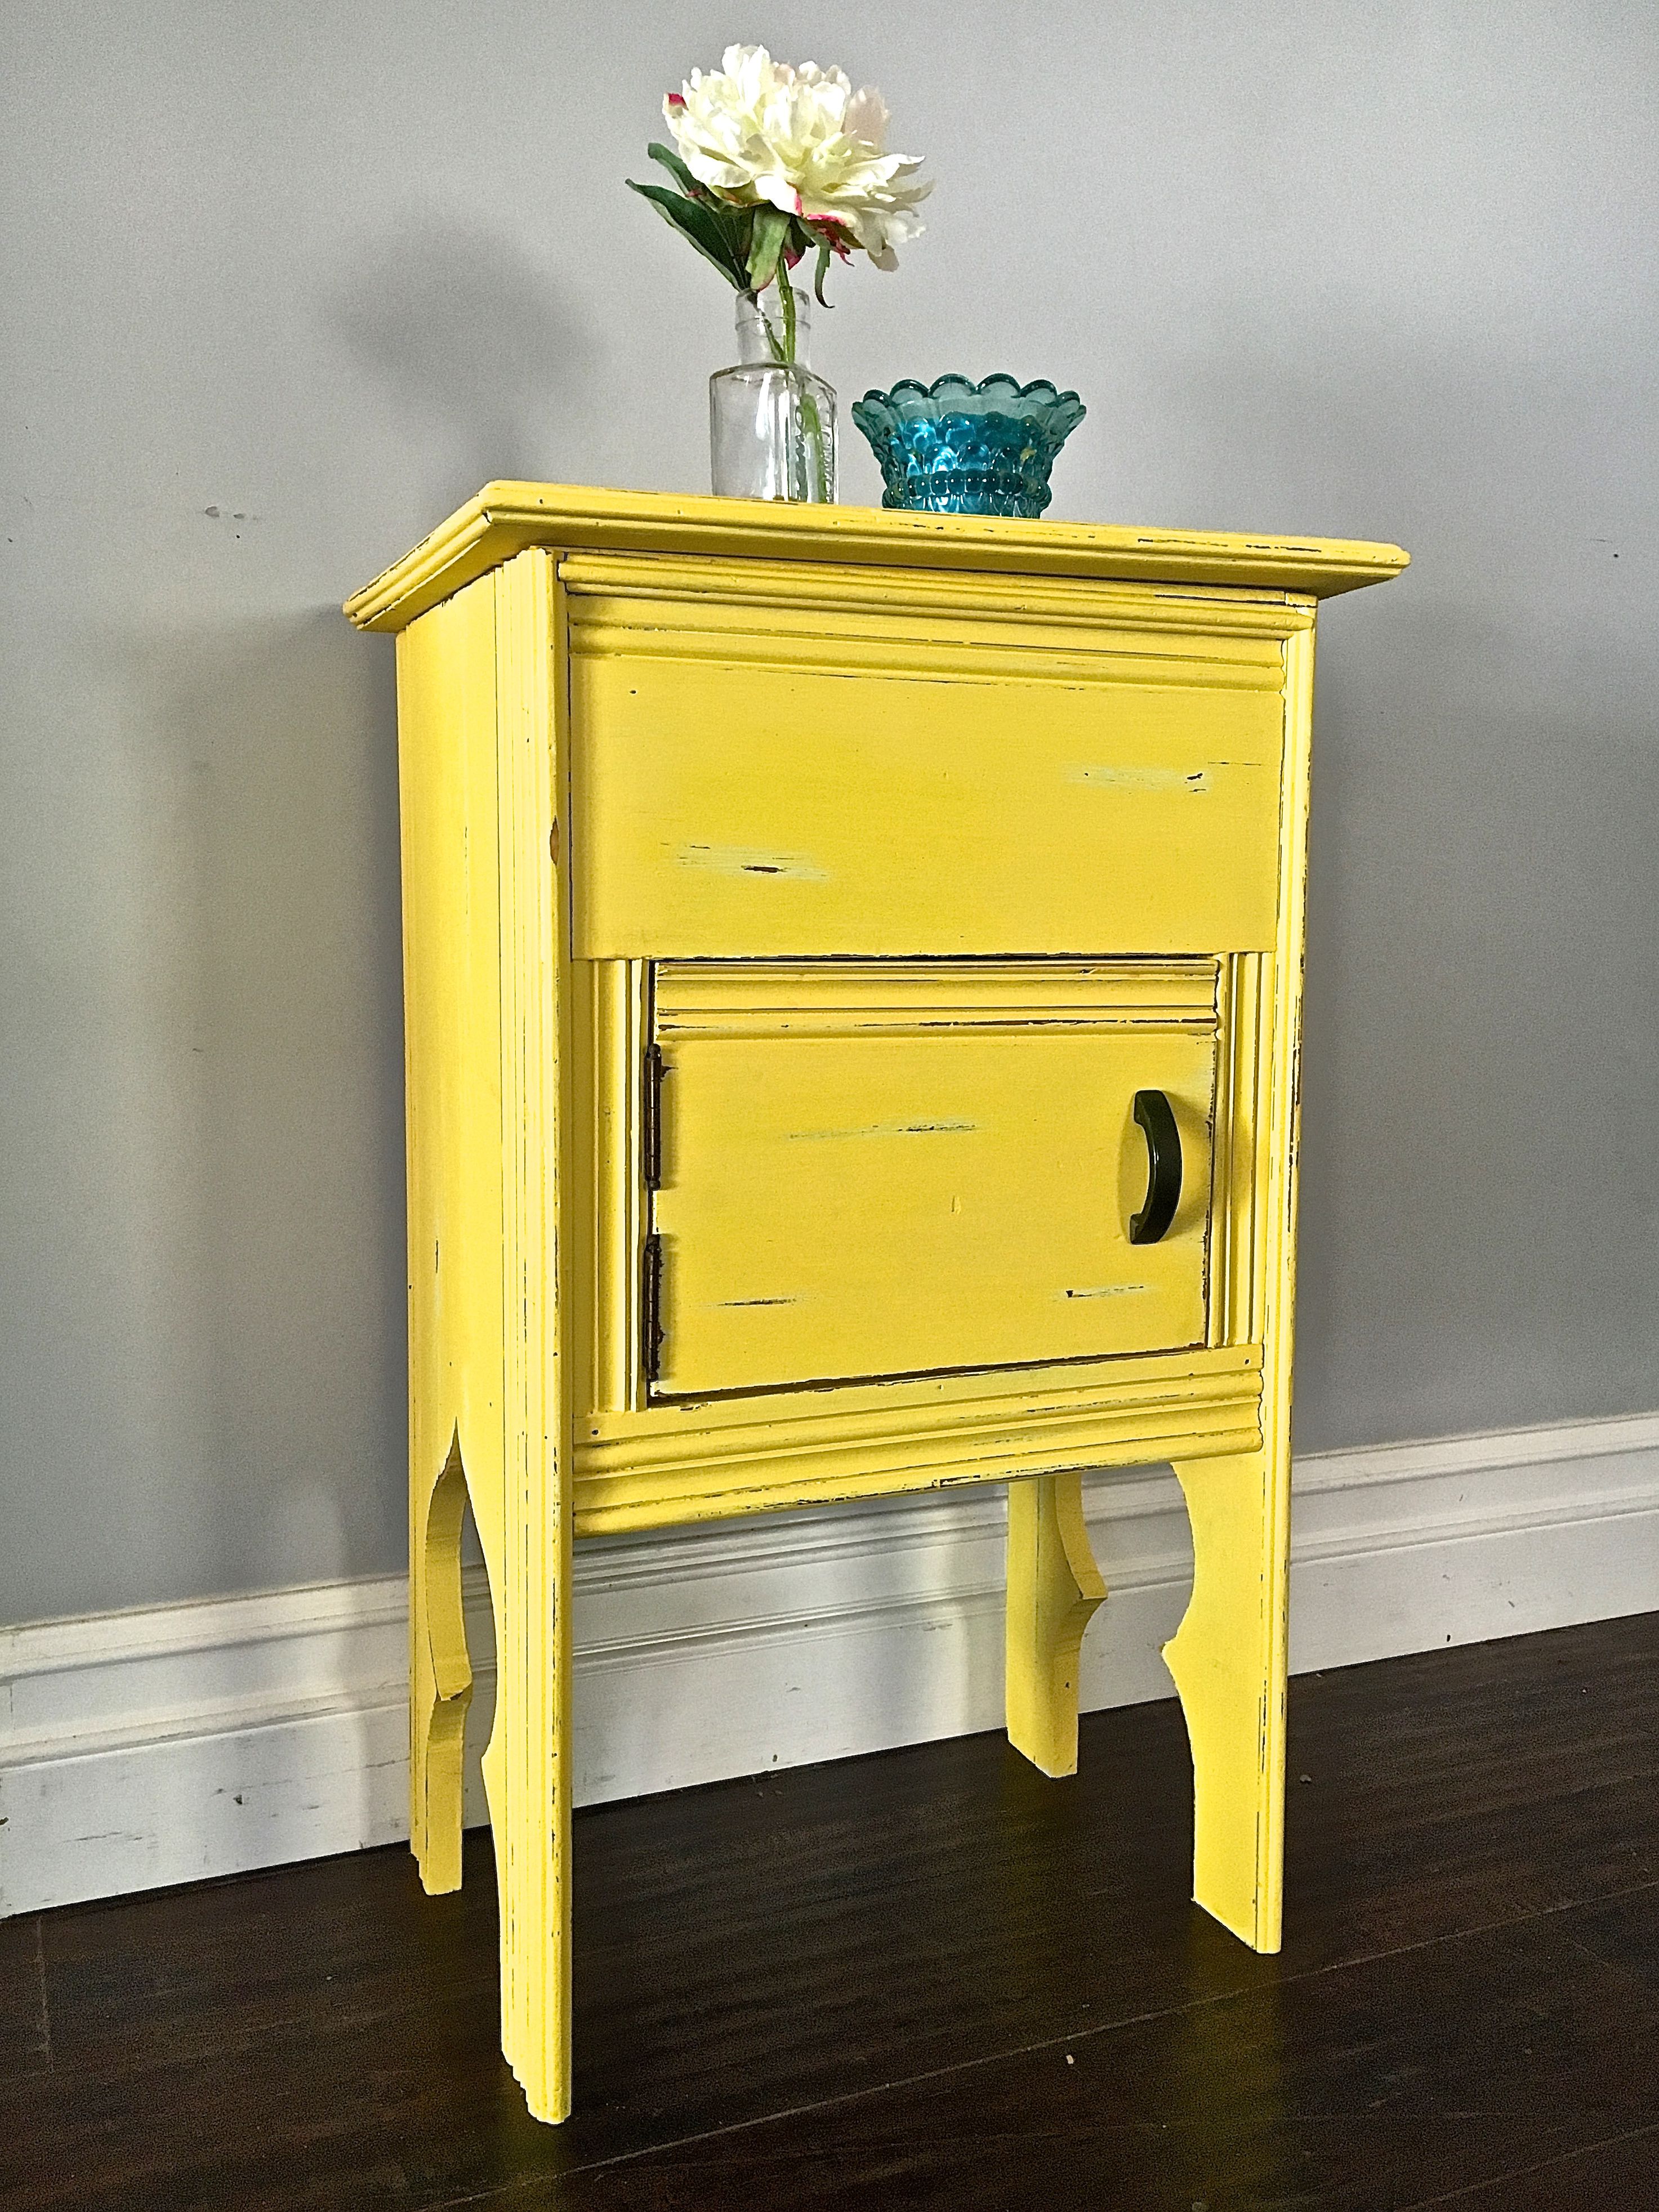 shabby chic yellow accent table custom order for araceli uproar high dining room furniture edmonton patio umbrellas large sofa washers marble bistro bunnings storage cabinets ikea